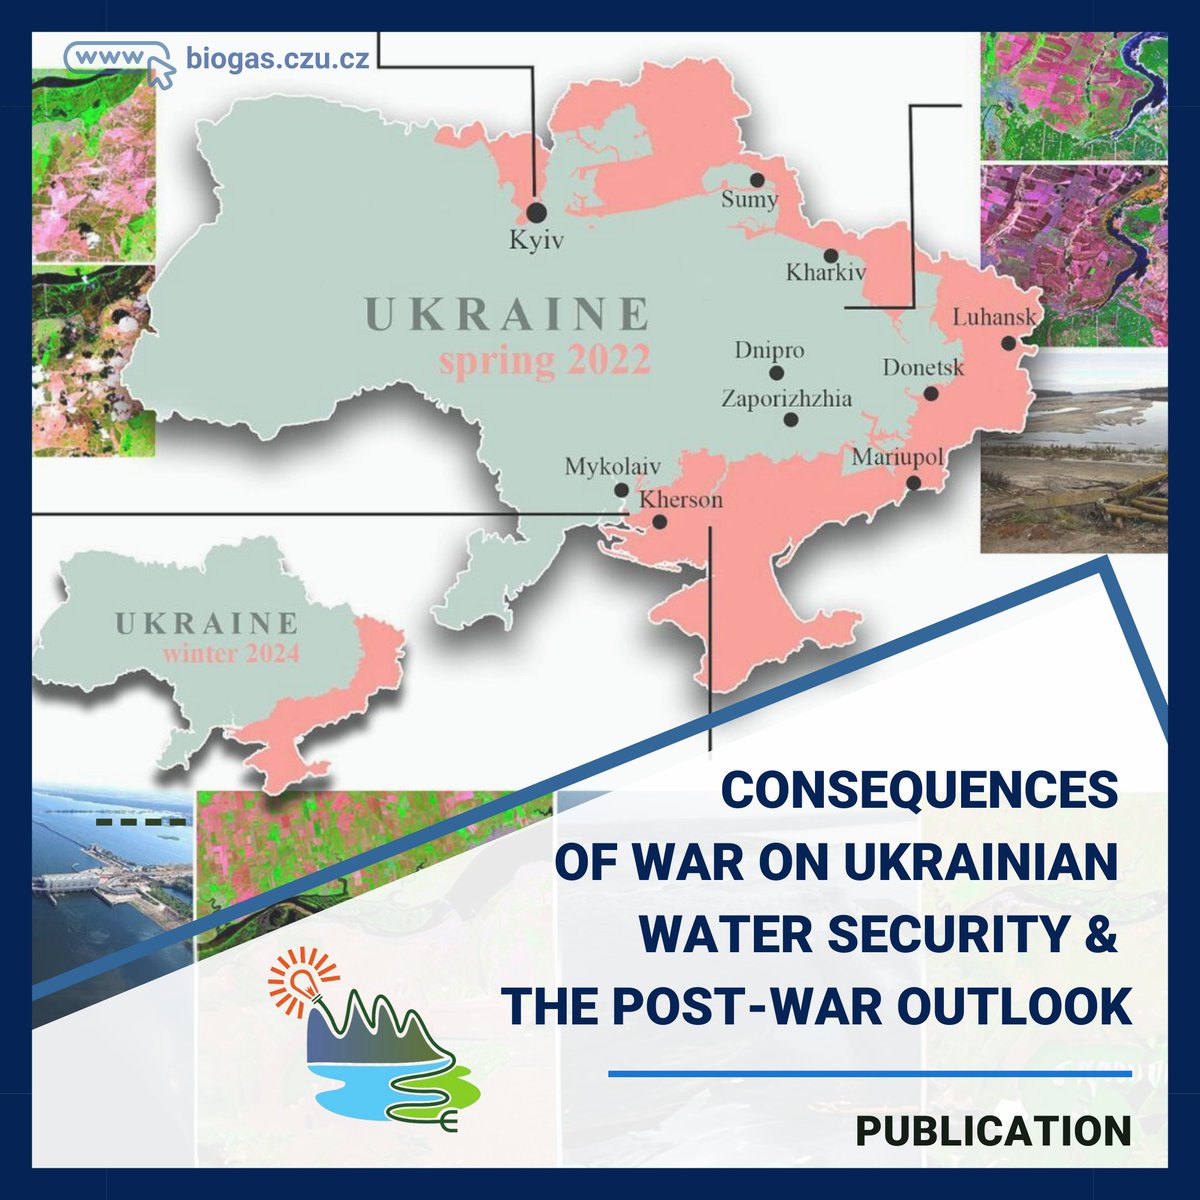 📢 #NewPublication alert! Assoc. Prof. Dr. @HynekRoubik published a paper on the ecological/economic consequences of the Russian-Ukrainian war on Ukrainian water bodies and infrastructure🇺🇦
🌐buff.ly/44roVlT | doi.org/mv27
#BiogasResearchTeam #UkrainianRecovery